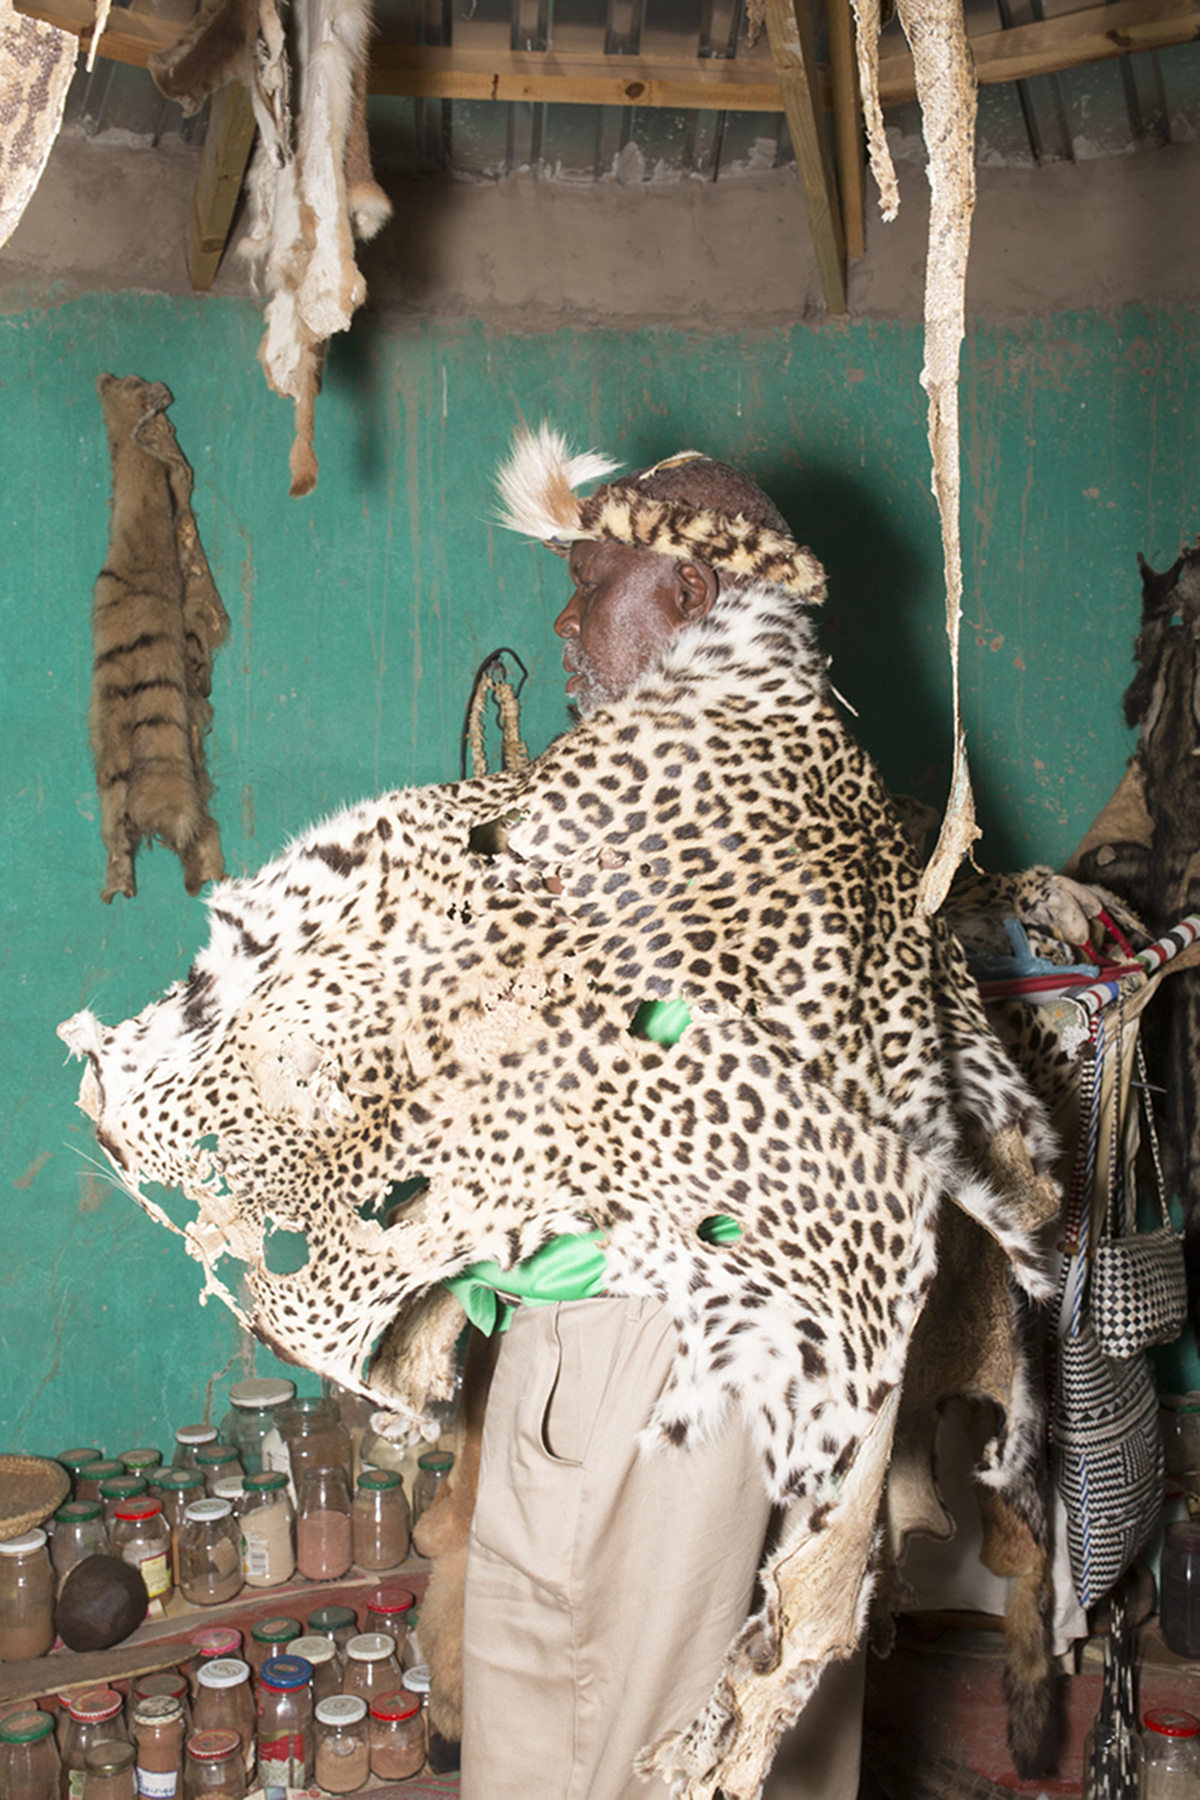 Giya Makondo-Wills, “They Came From The Water While The World Watched” – Profile of a man wearing a leopard skin and headband, inside a hut with lots of spices and animal skins hanging from the walls and the ceiling